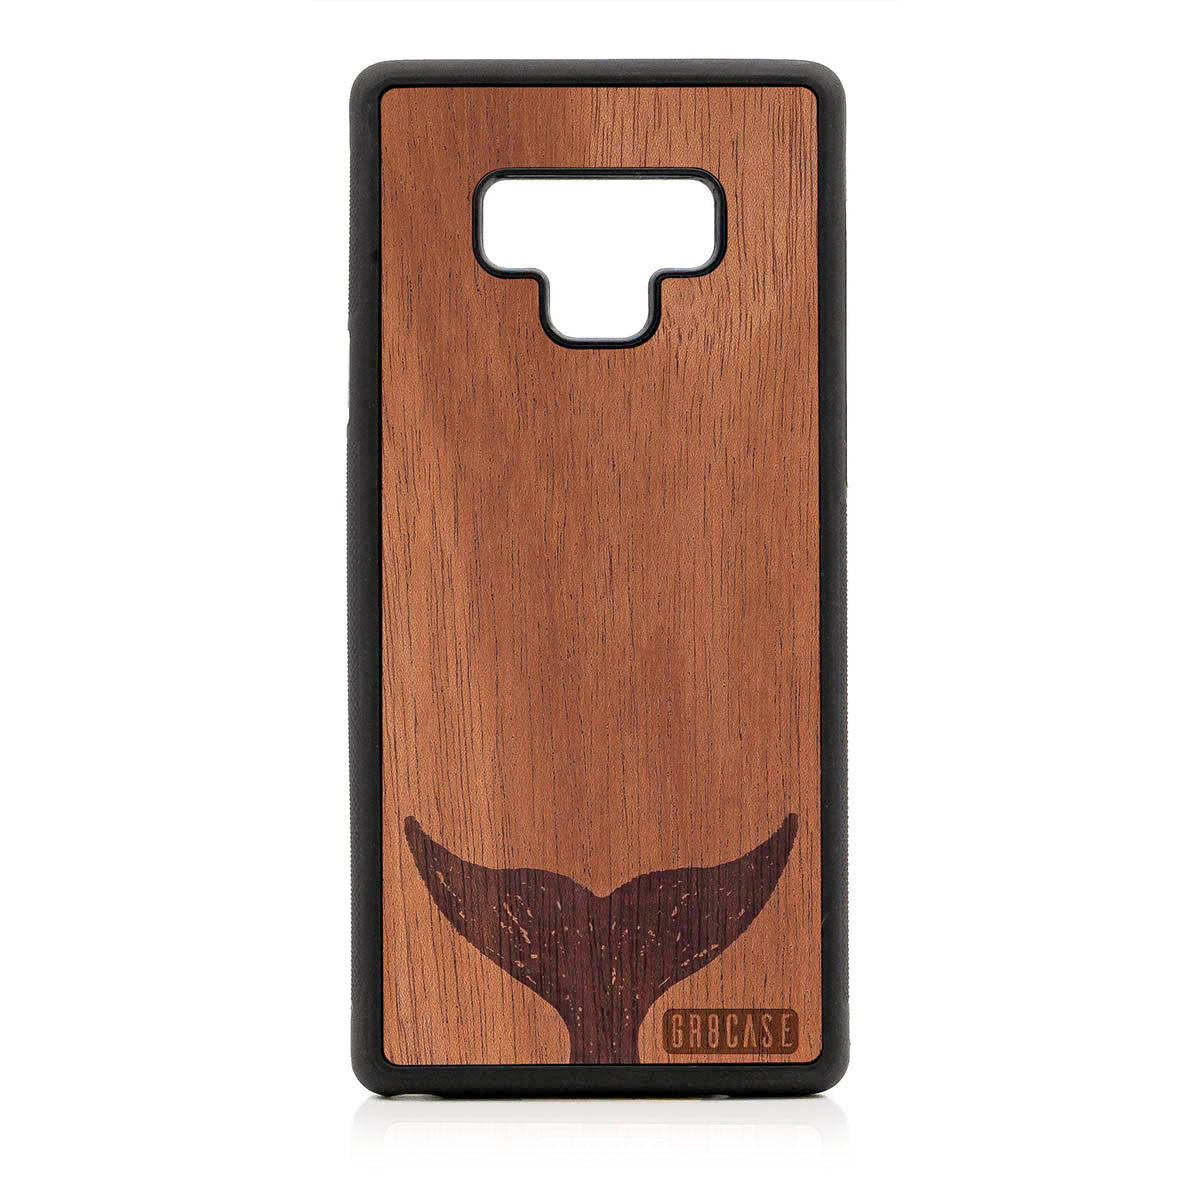 Whale Tail Design Wood Case For Samsung Galaxy Note 9